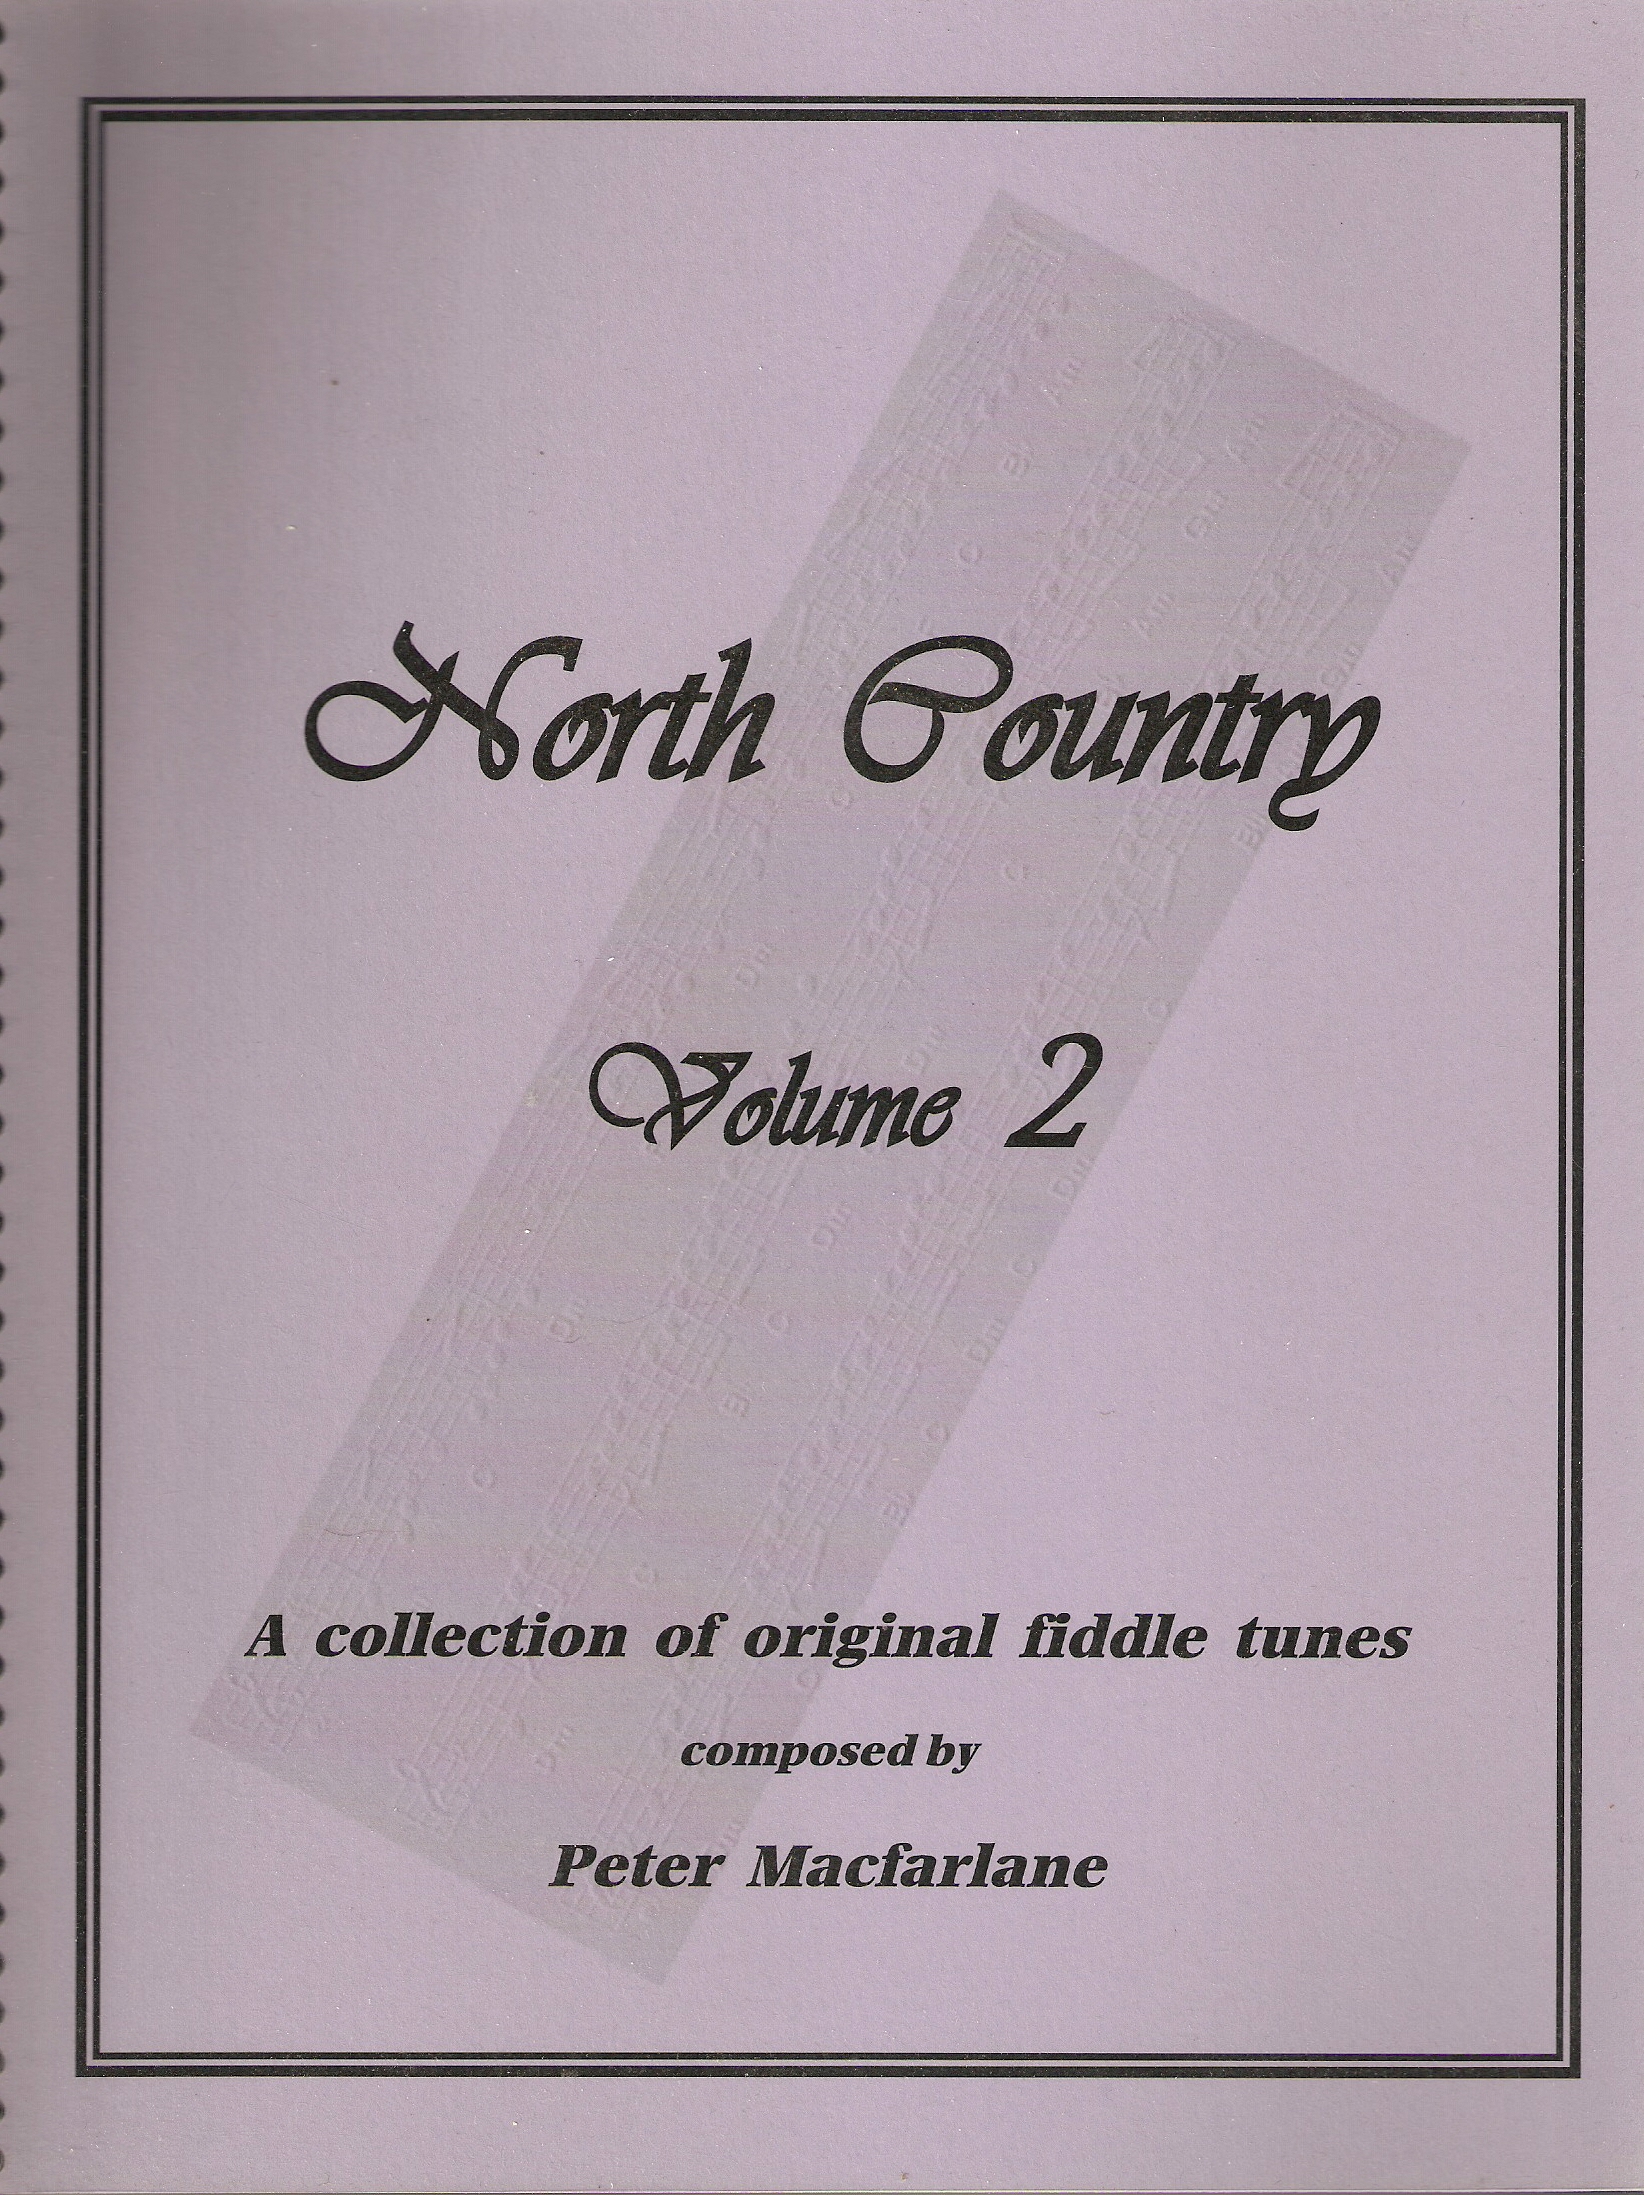 North Country Vol. 1